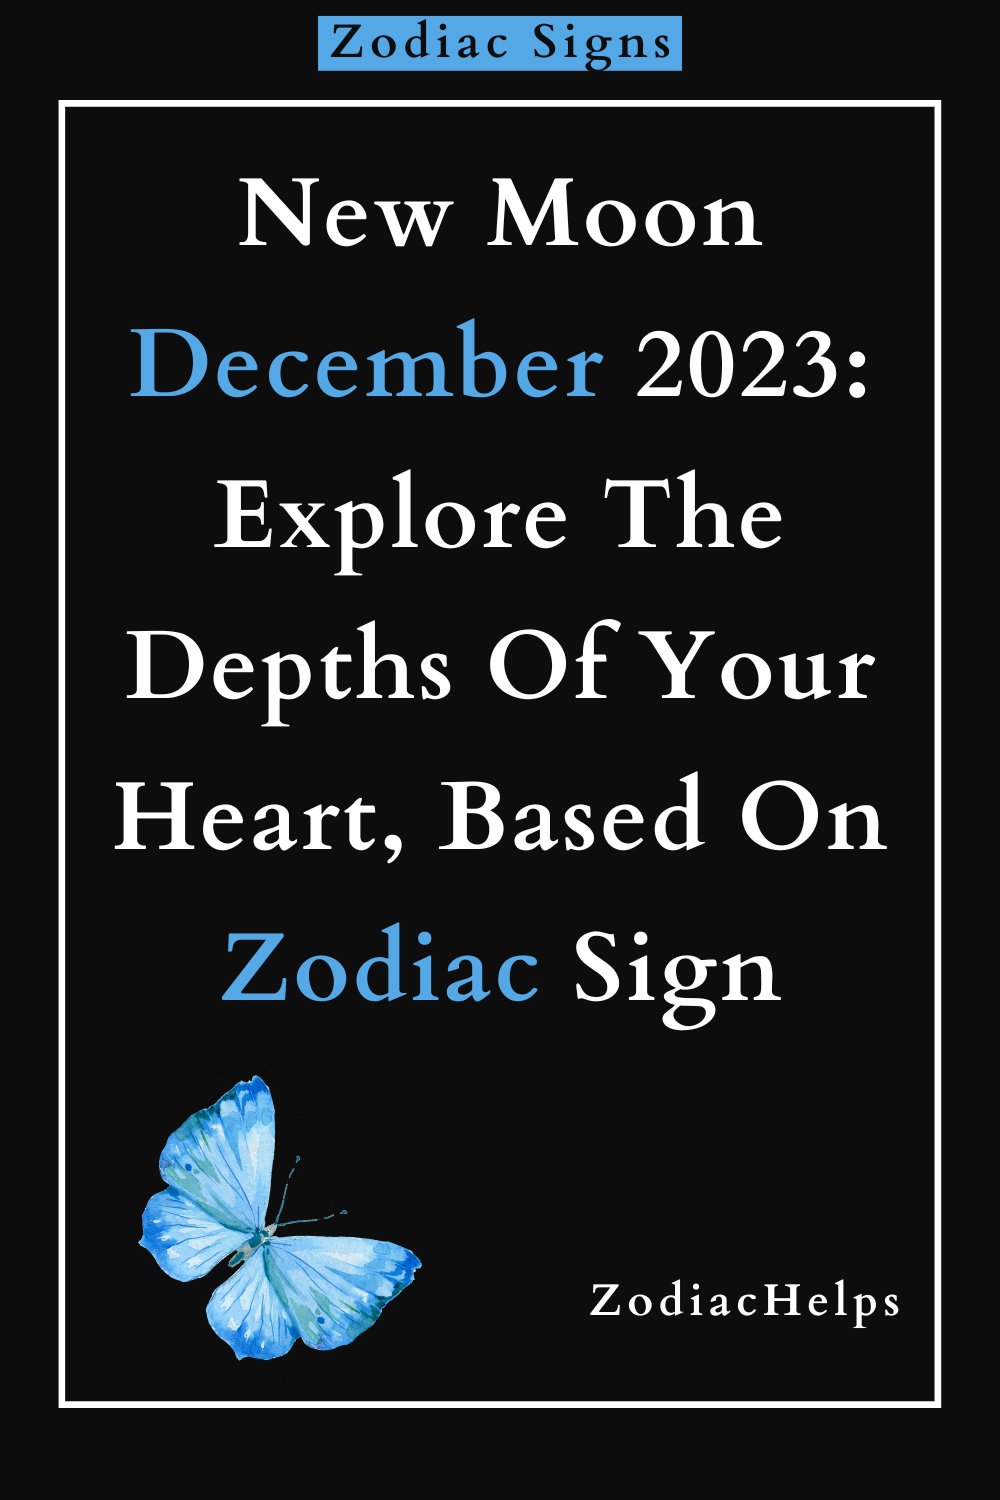 New Moon December 2023 Explore The Depths Of Your Heart, Based On Zodiac Sign